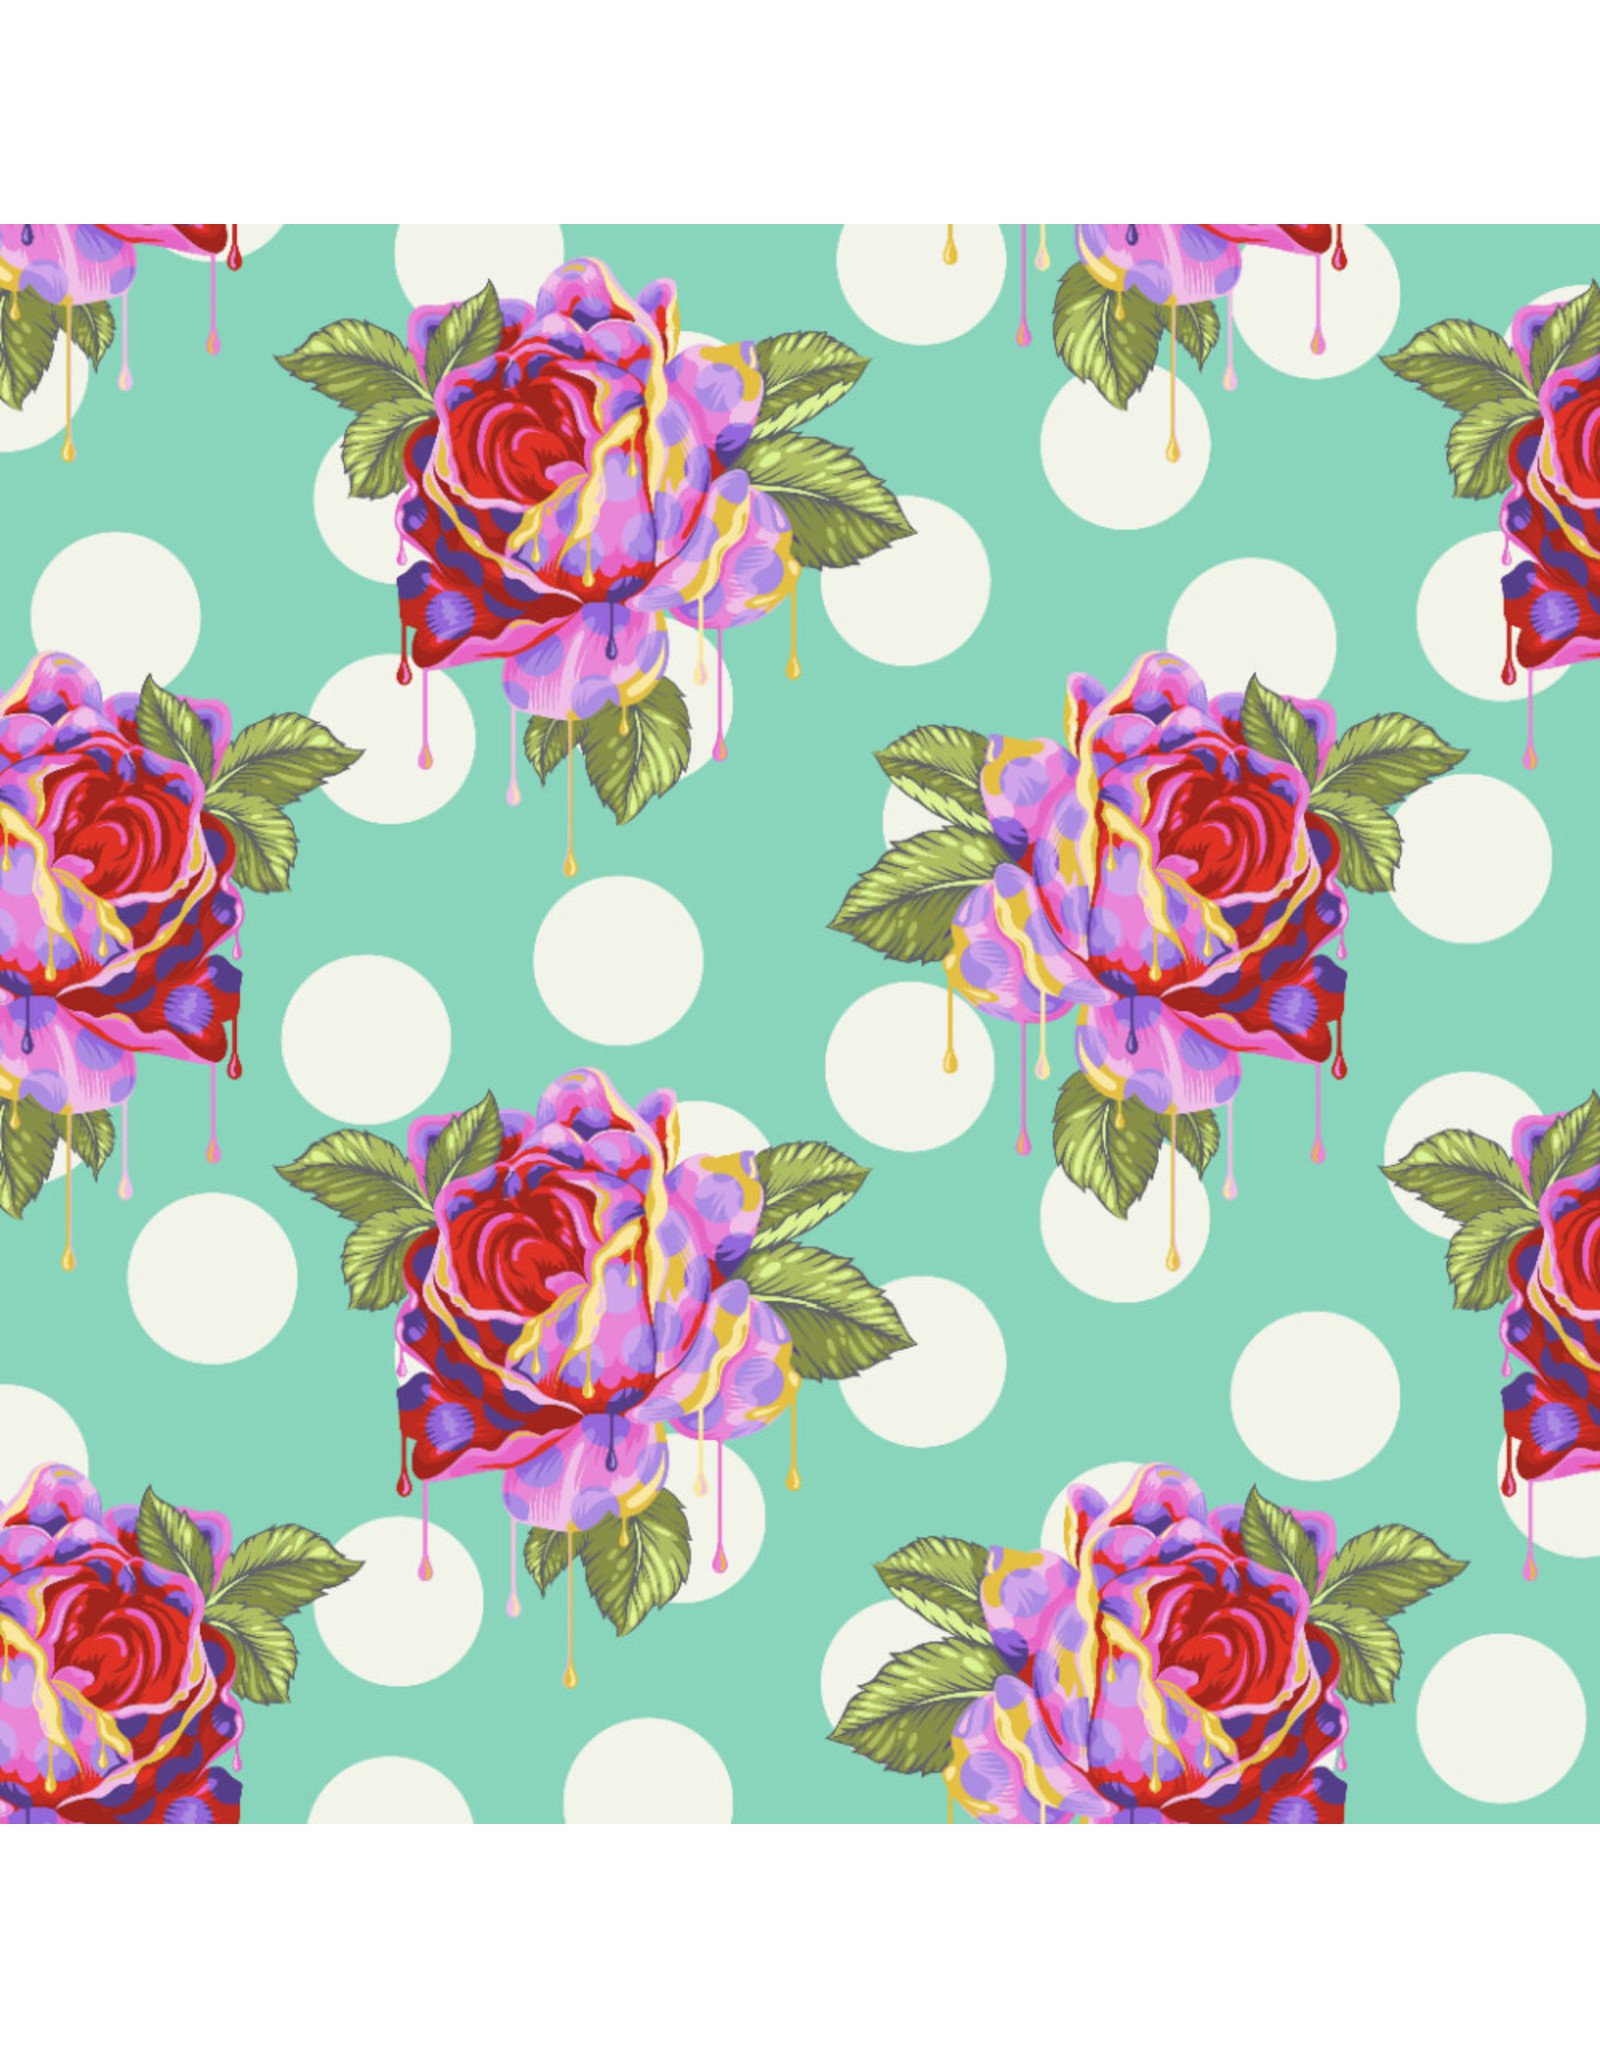 Tula Pink Curiouser and Curiouser, Painted Roses in Wonder, Fabric Half-Yards